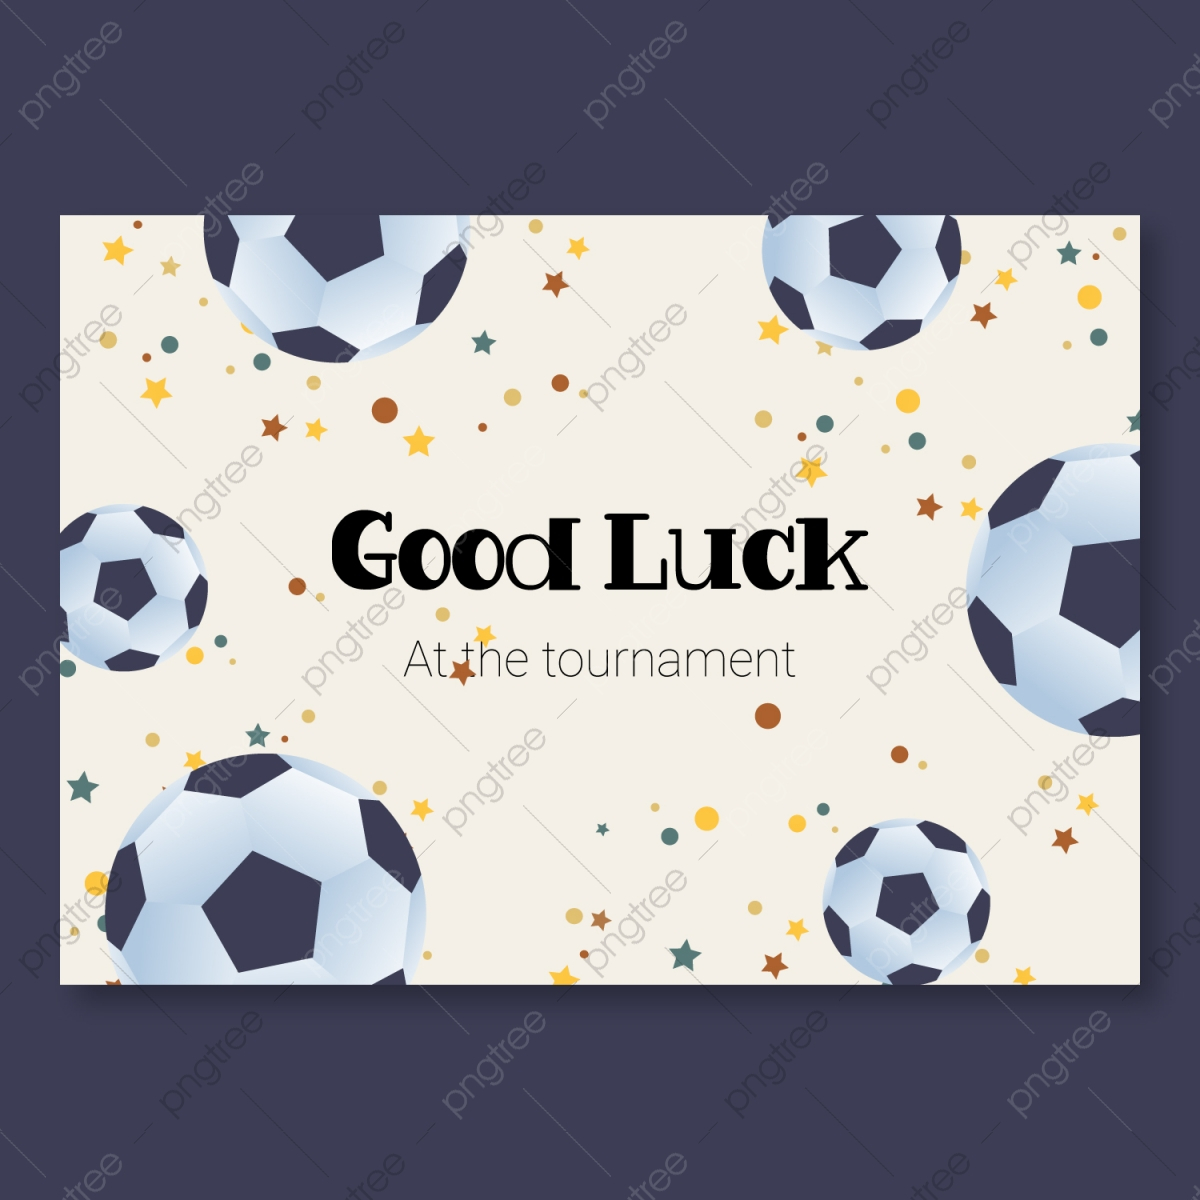 Good Luck Card Template With Soccer Balls Template Download on Pngtree Throughout Soccer Report Card Template